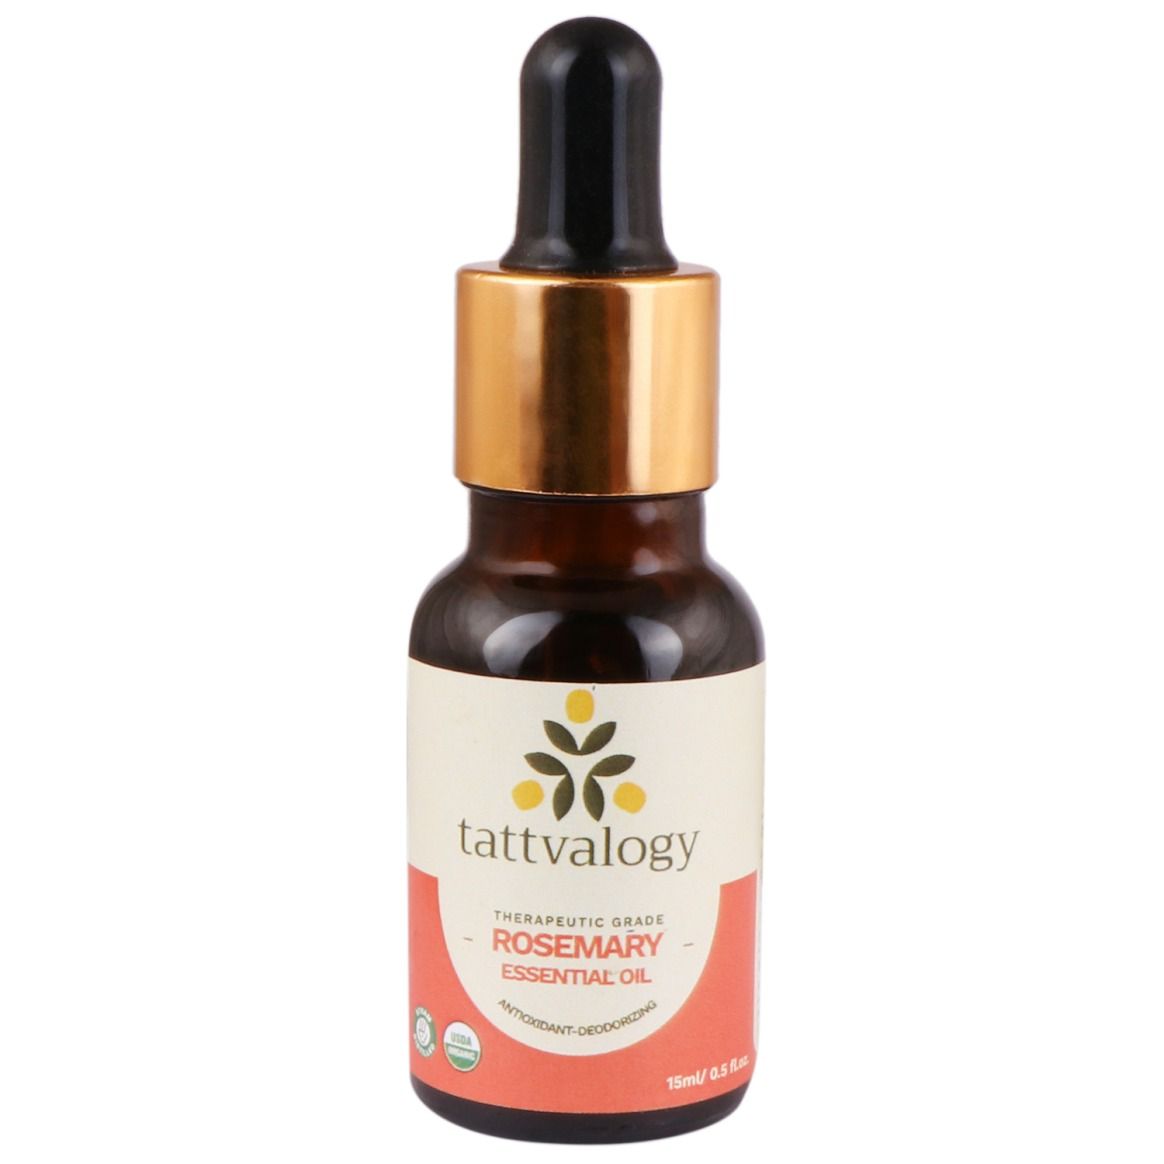 Tattvalogy Organic Rosemary Essential Oil, Therapeutic Grade